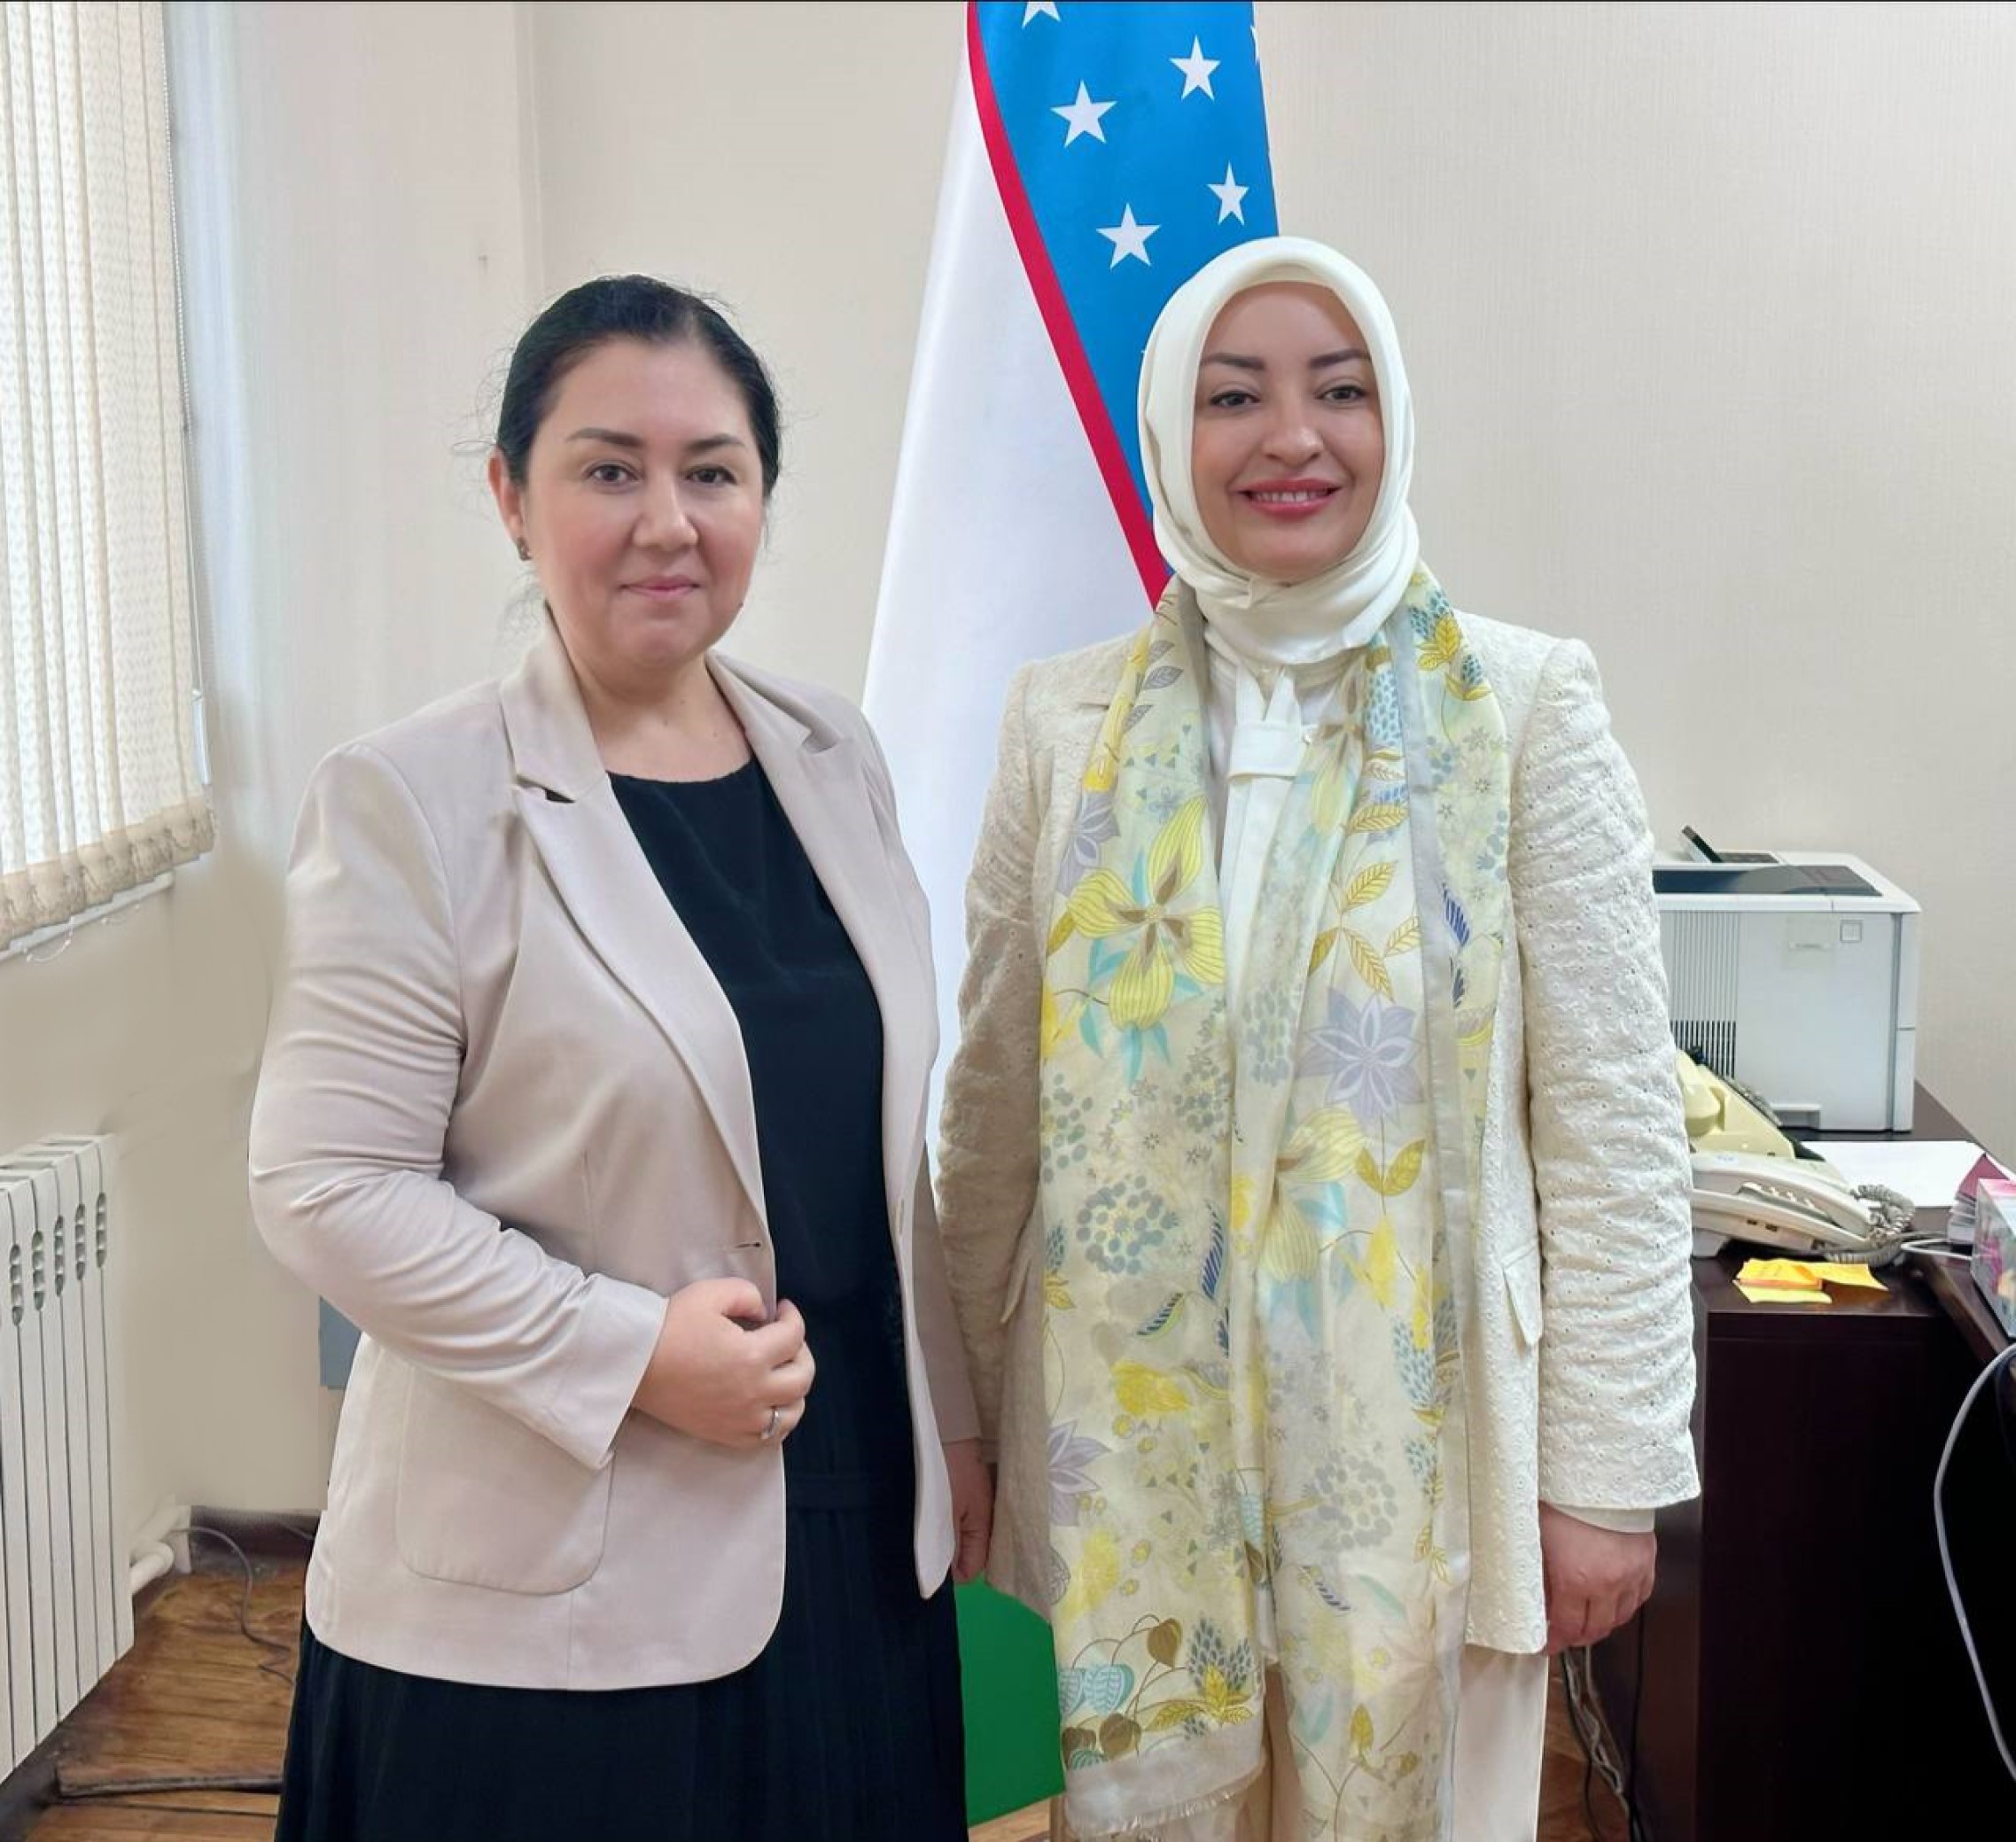 The Ombudsman met with the Chairman of the Committee on Equal Opportunities for Women and Men of the Grand National Assembly (Parliament) of Turkey